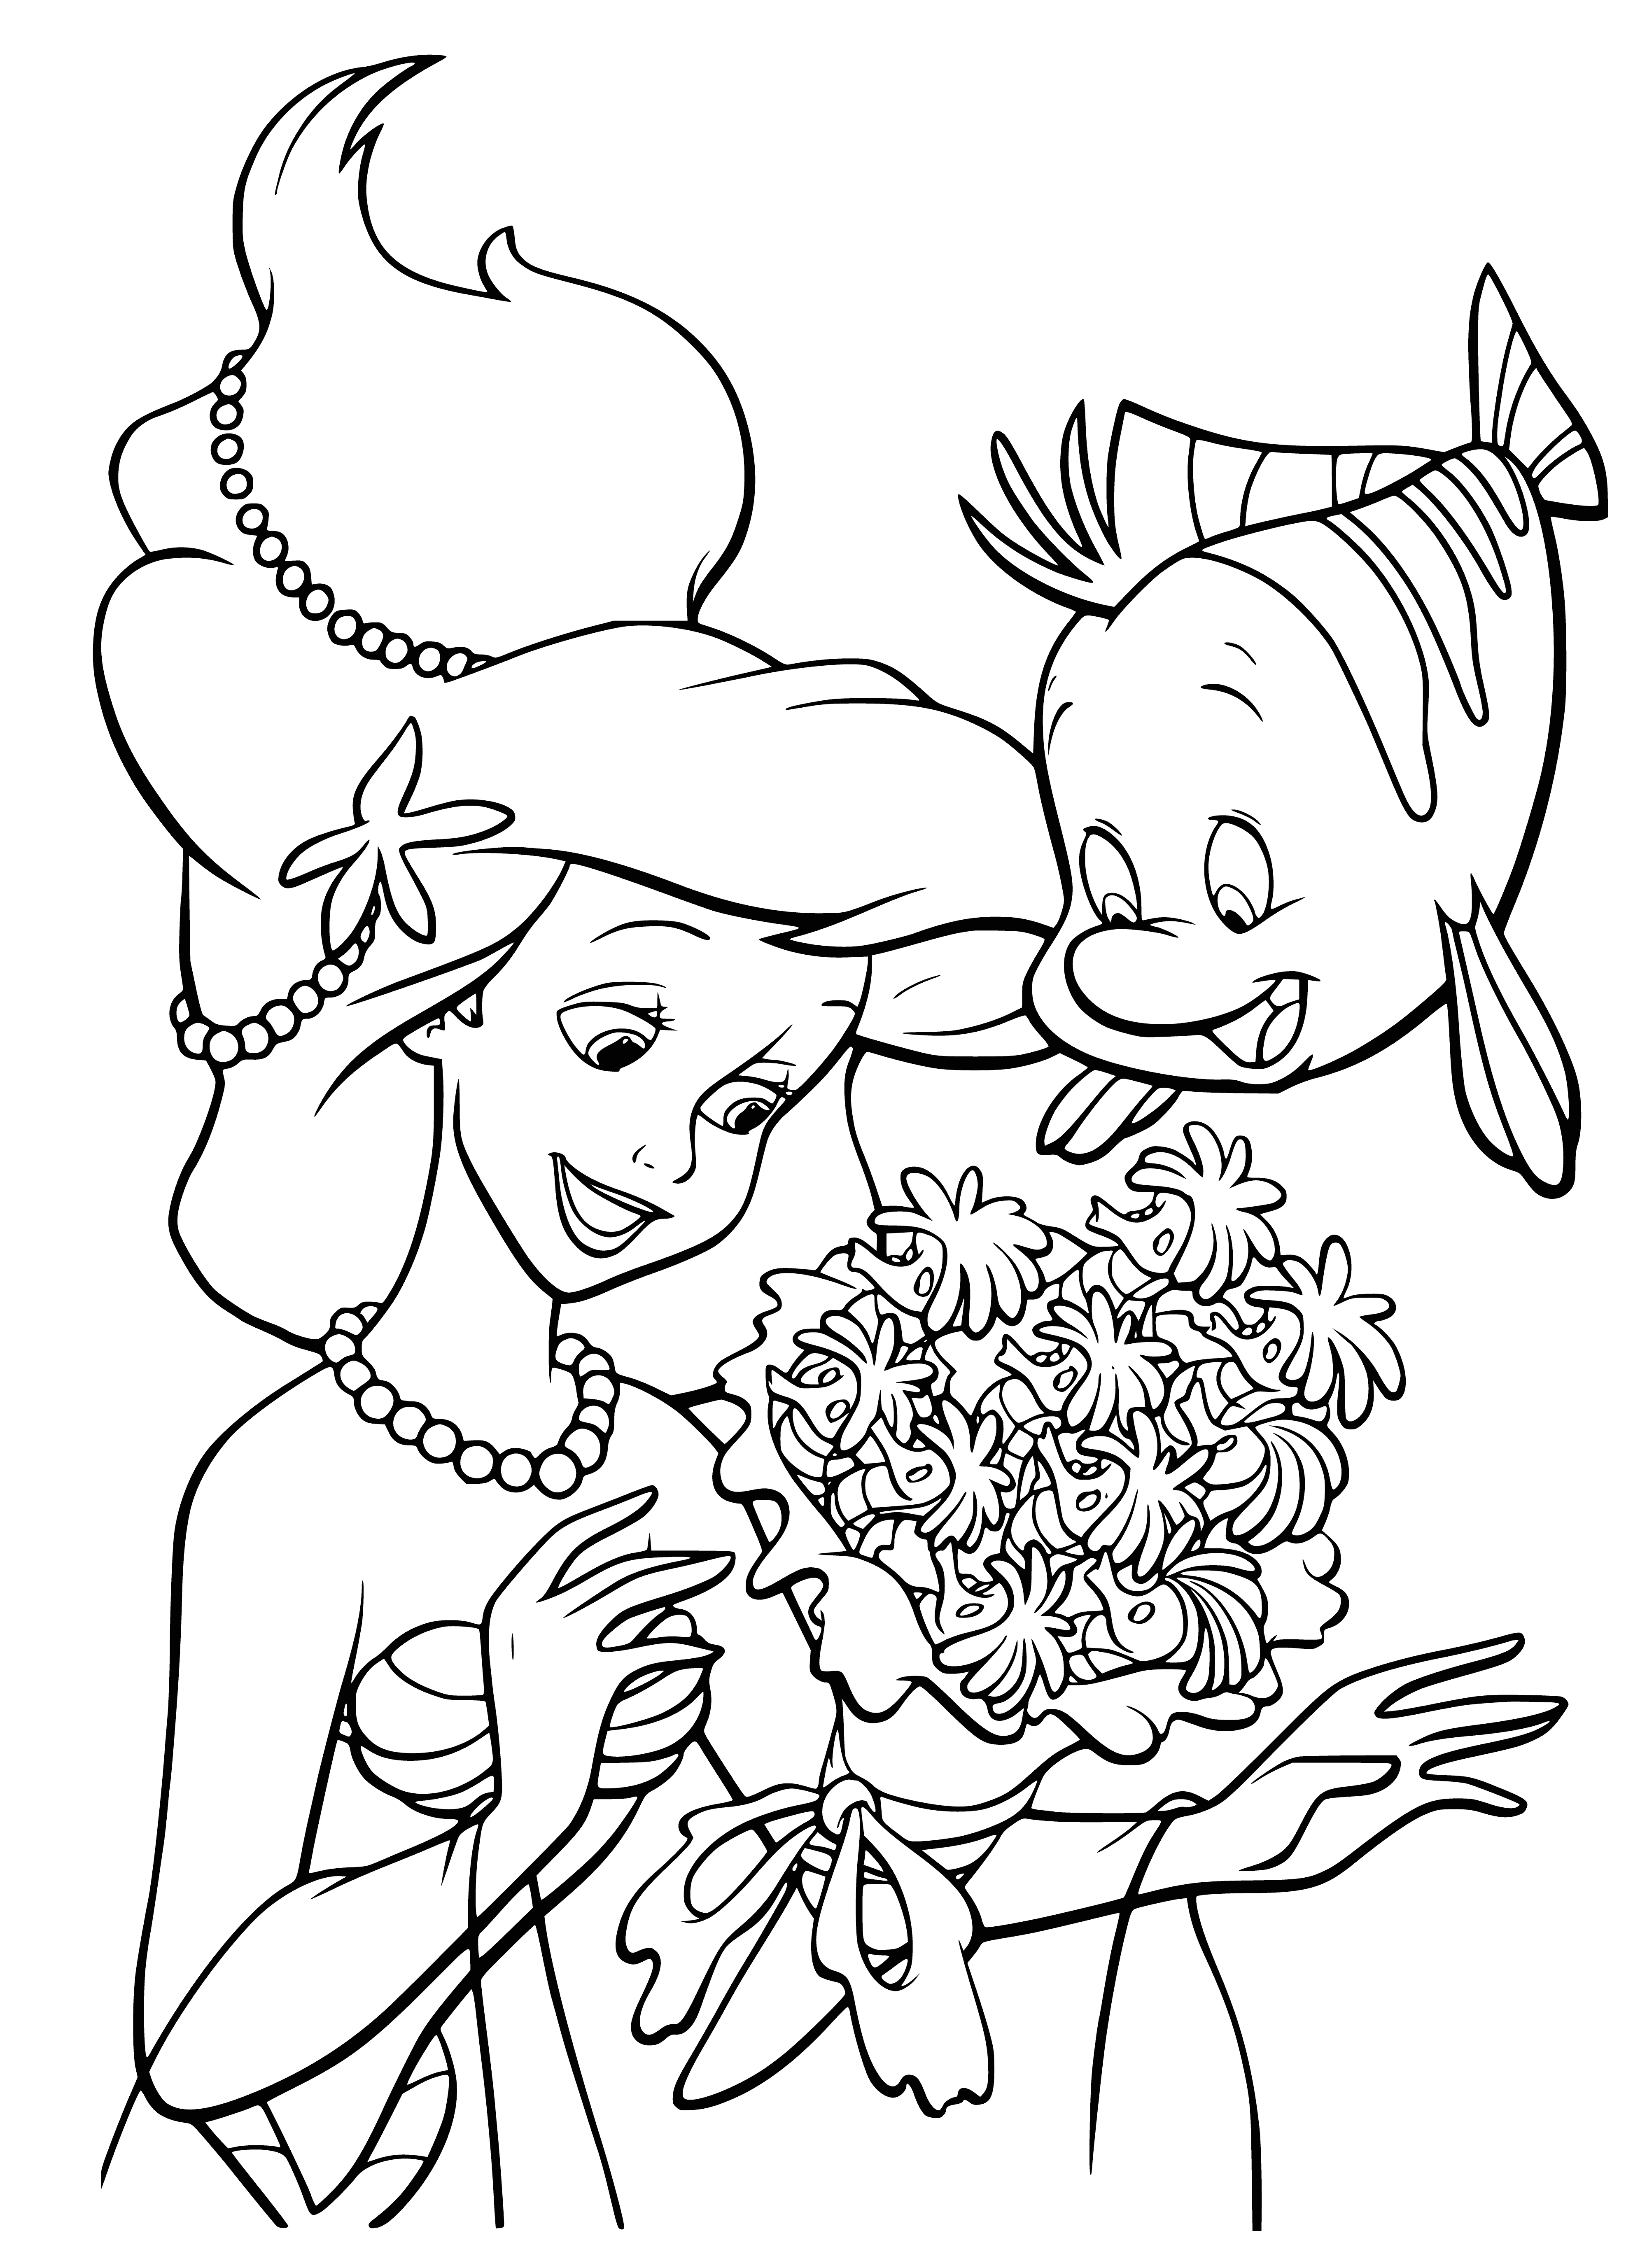 coloring page: Girl with red hair stands in a field of flowers with a blue fish, wearing a blue dress with white accents.